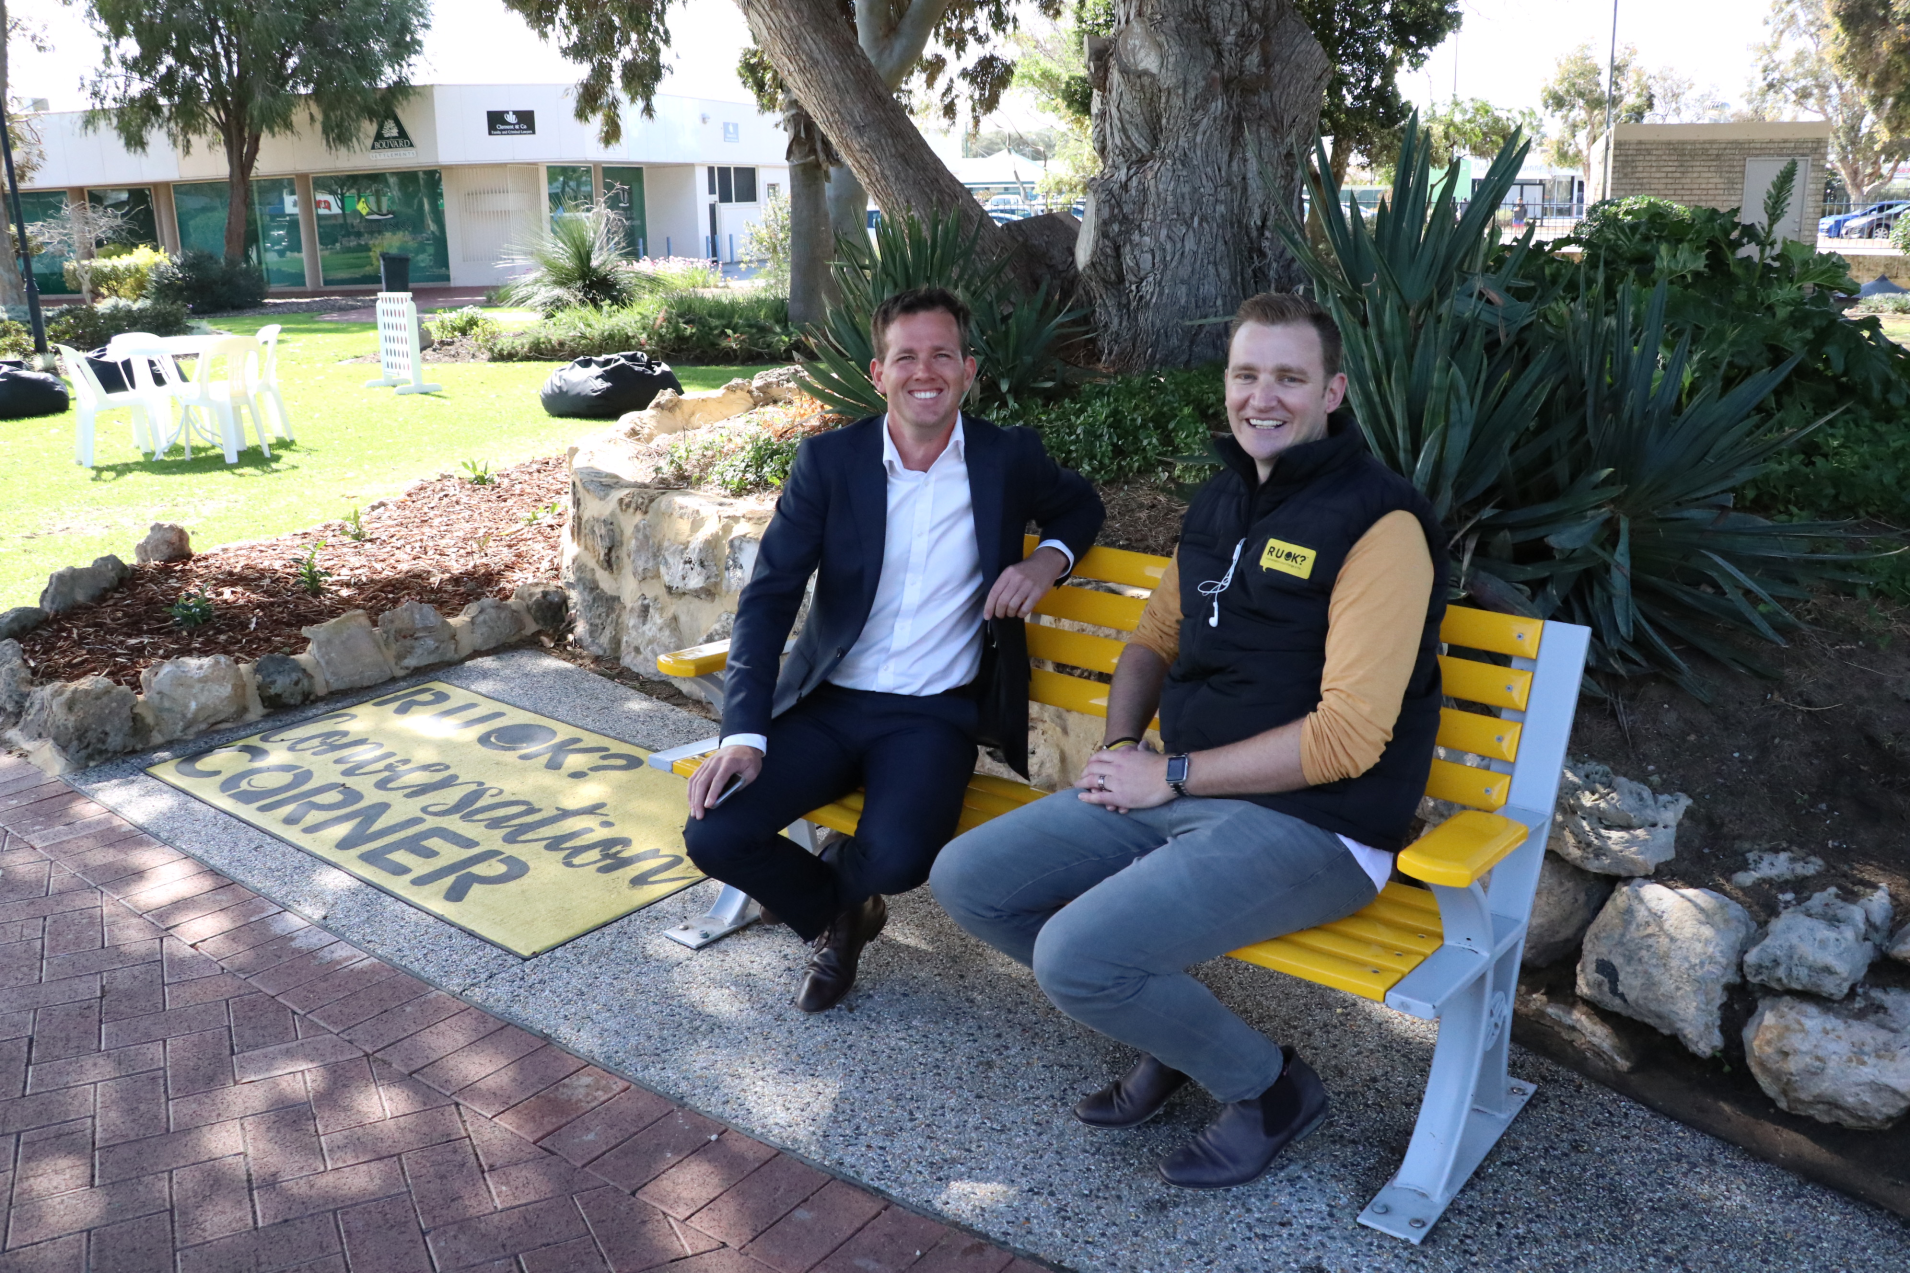 Two men sitting on the yellow bench, smiling up at the camera